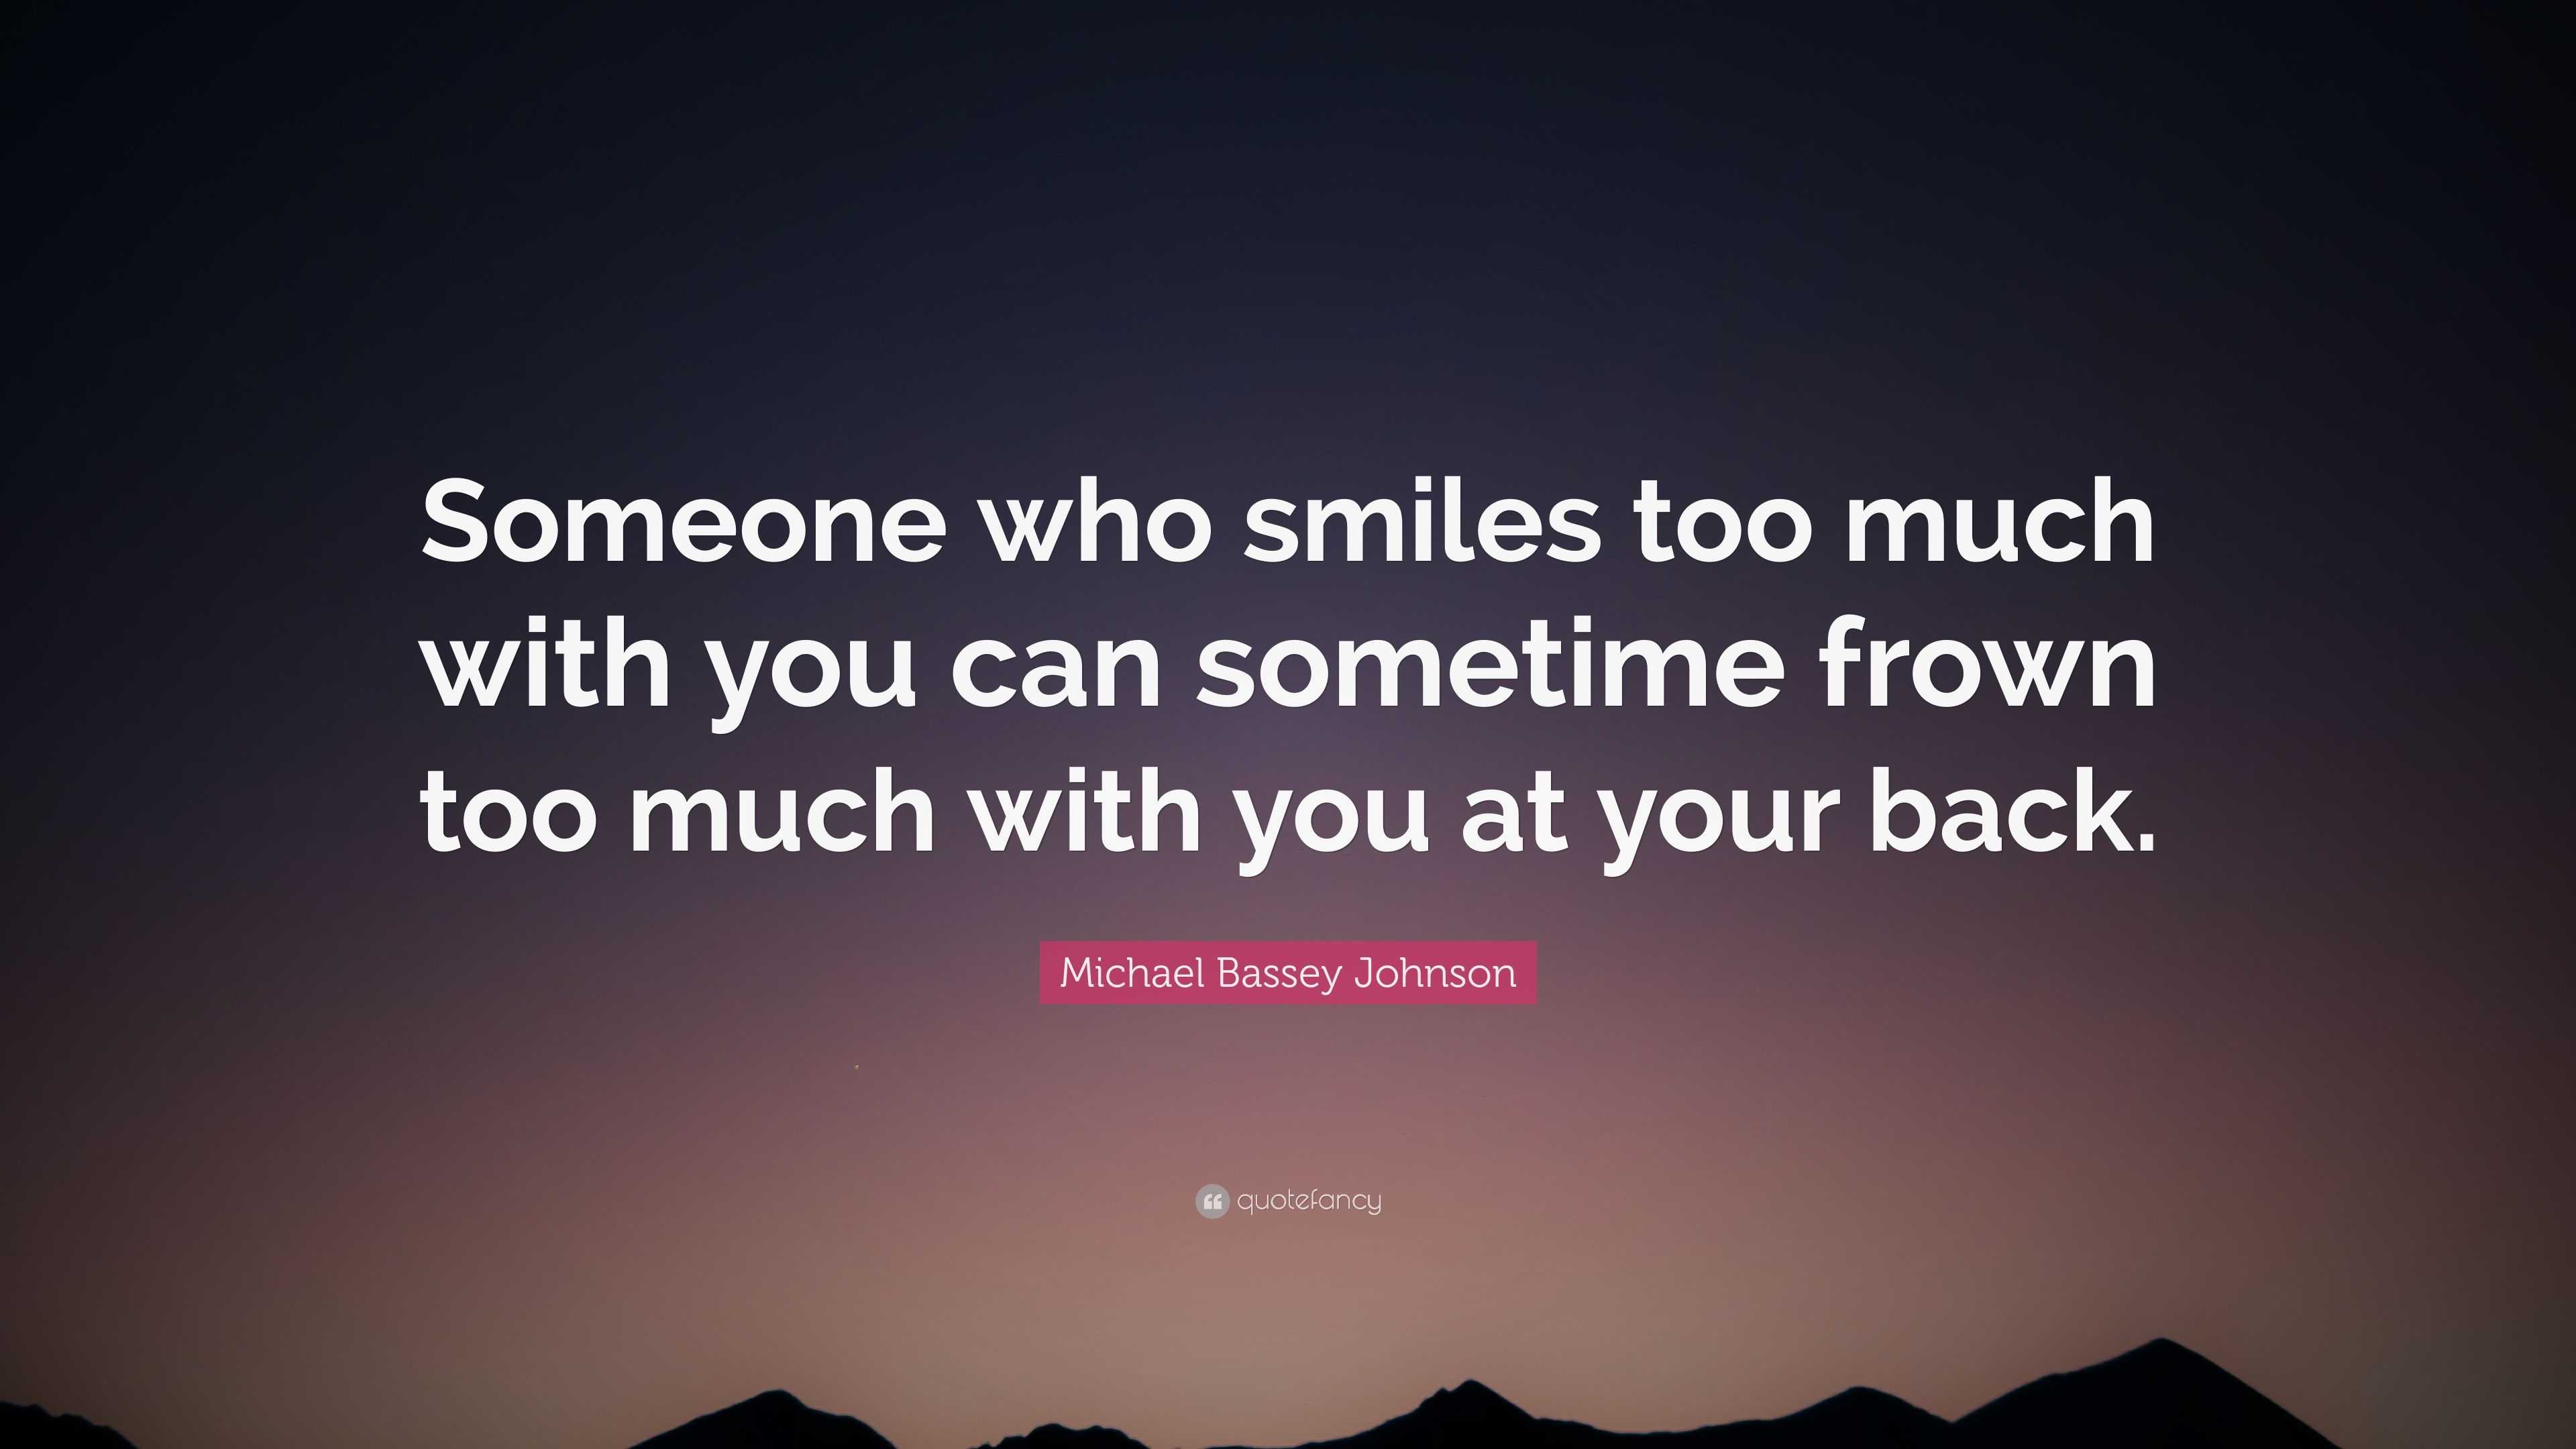 Michael Bassey Johnson Quote: “Someone who smiles too much with you can ...